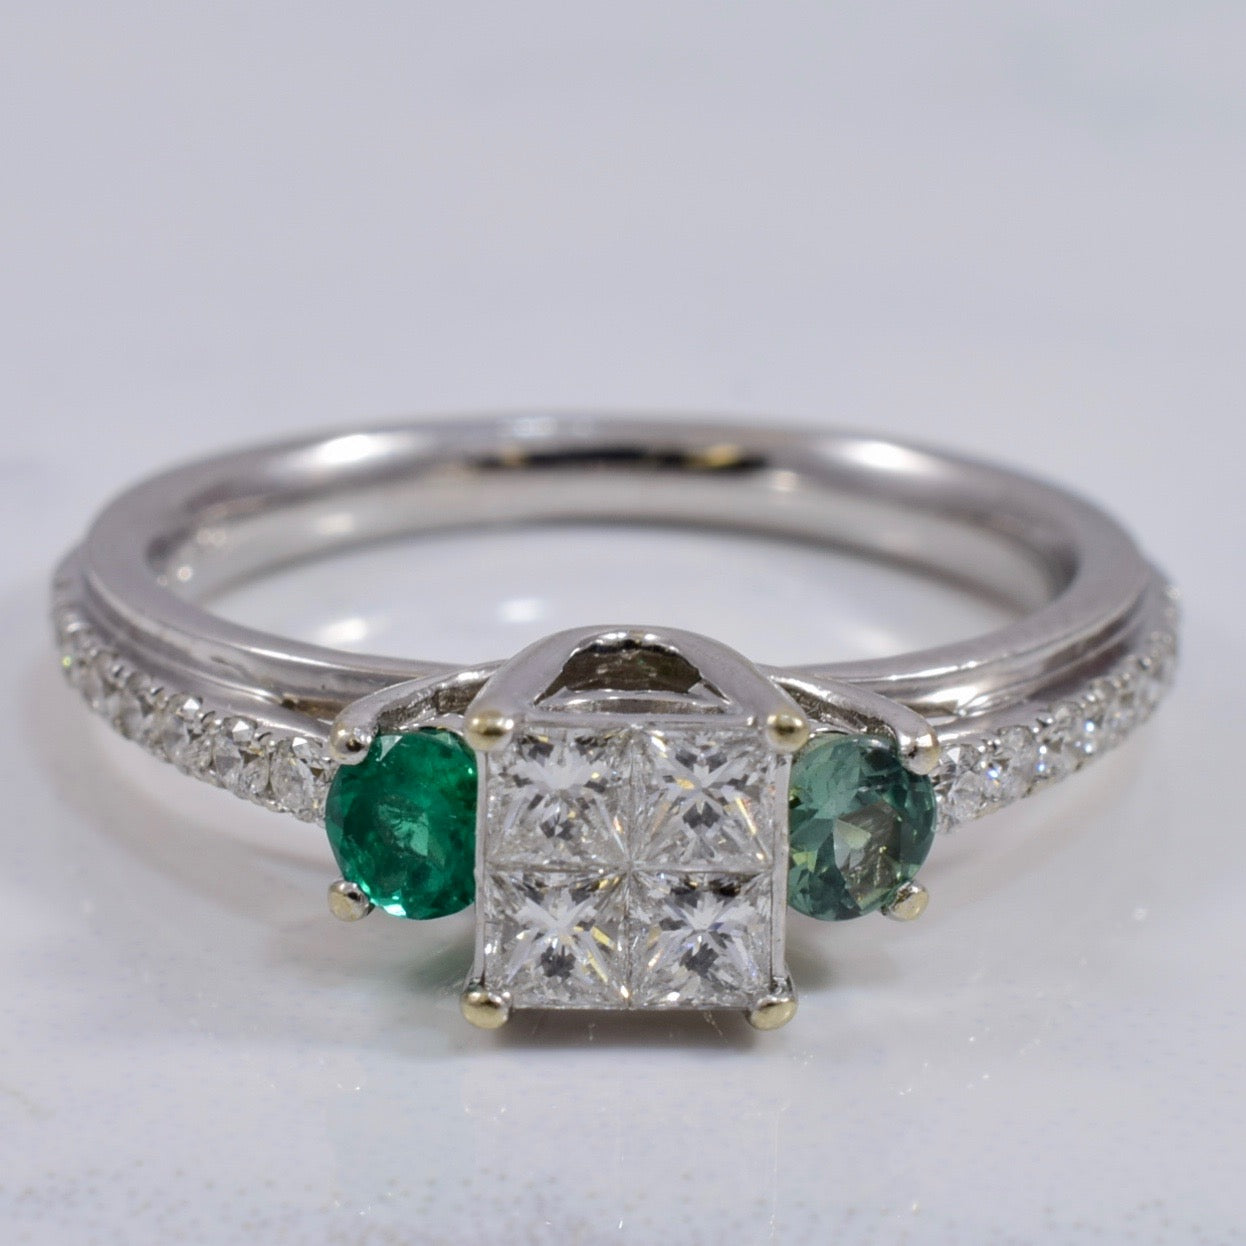 Diamond Engagement Ring with Accent Emerald and Chrysoberyl | 0.47 ctw SZ 6.25 |